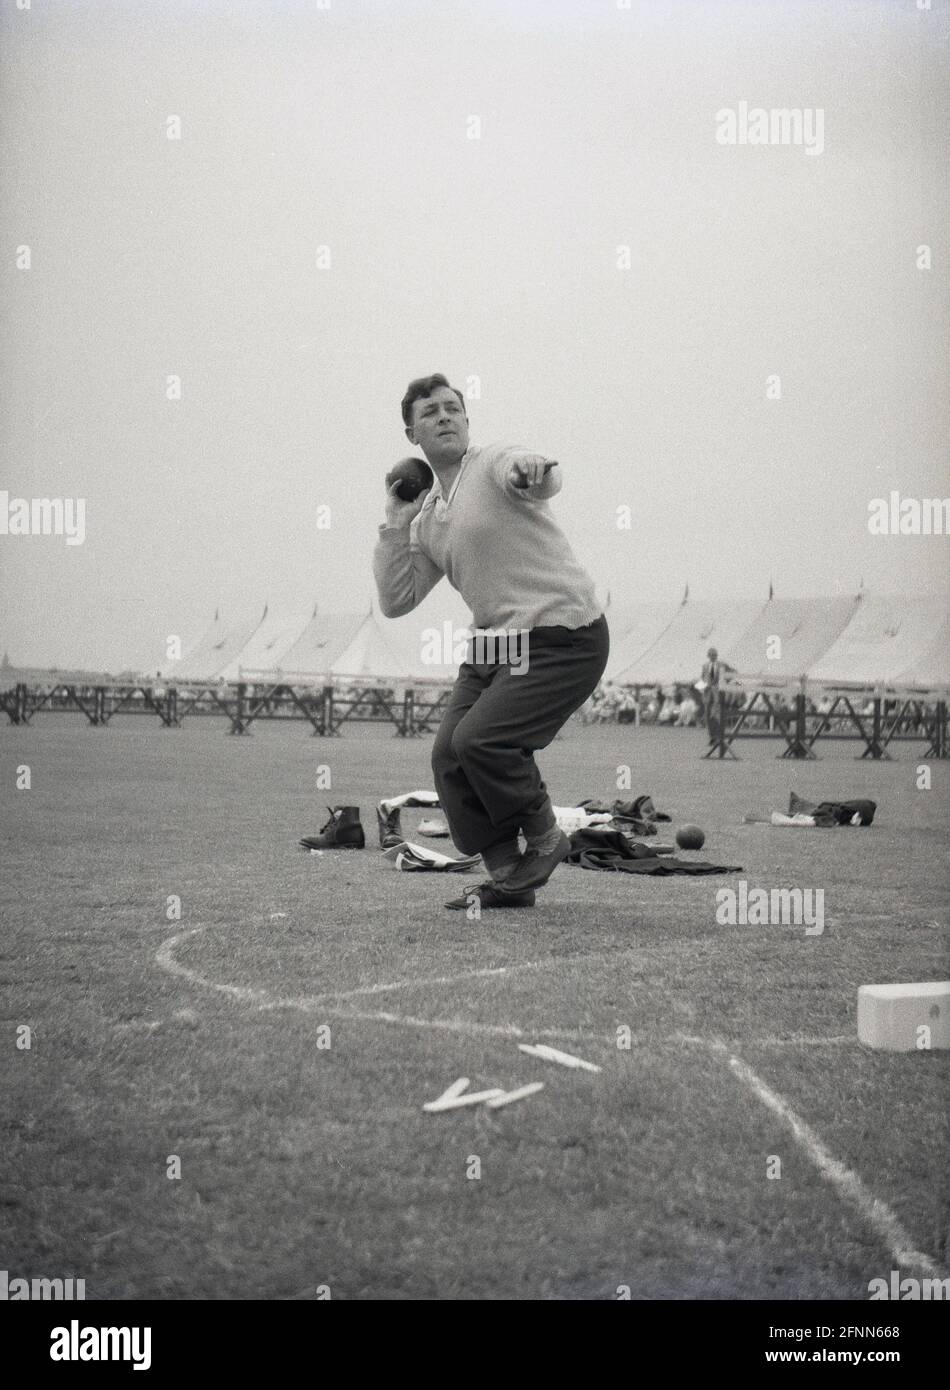 1954, historical, a man wearing a pair of trousers and a shirt and sweater, throwing the shotput, at a civil service sports day, England, UK, an amateur sports event. Putting the shot - a heavy metal ball - is a track and field event and has been part of the modern Olympic games since their revival in 1896. The shot put derives from the ancient sport of putting the stone. Stock Photo